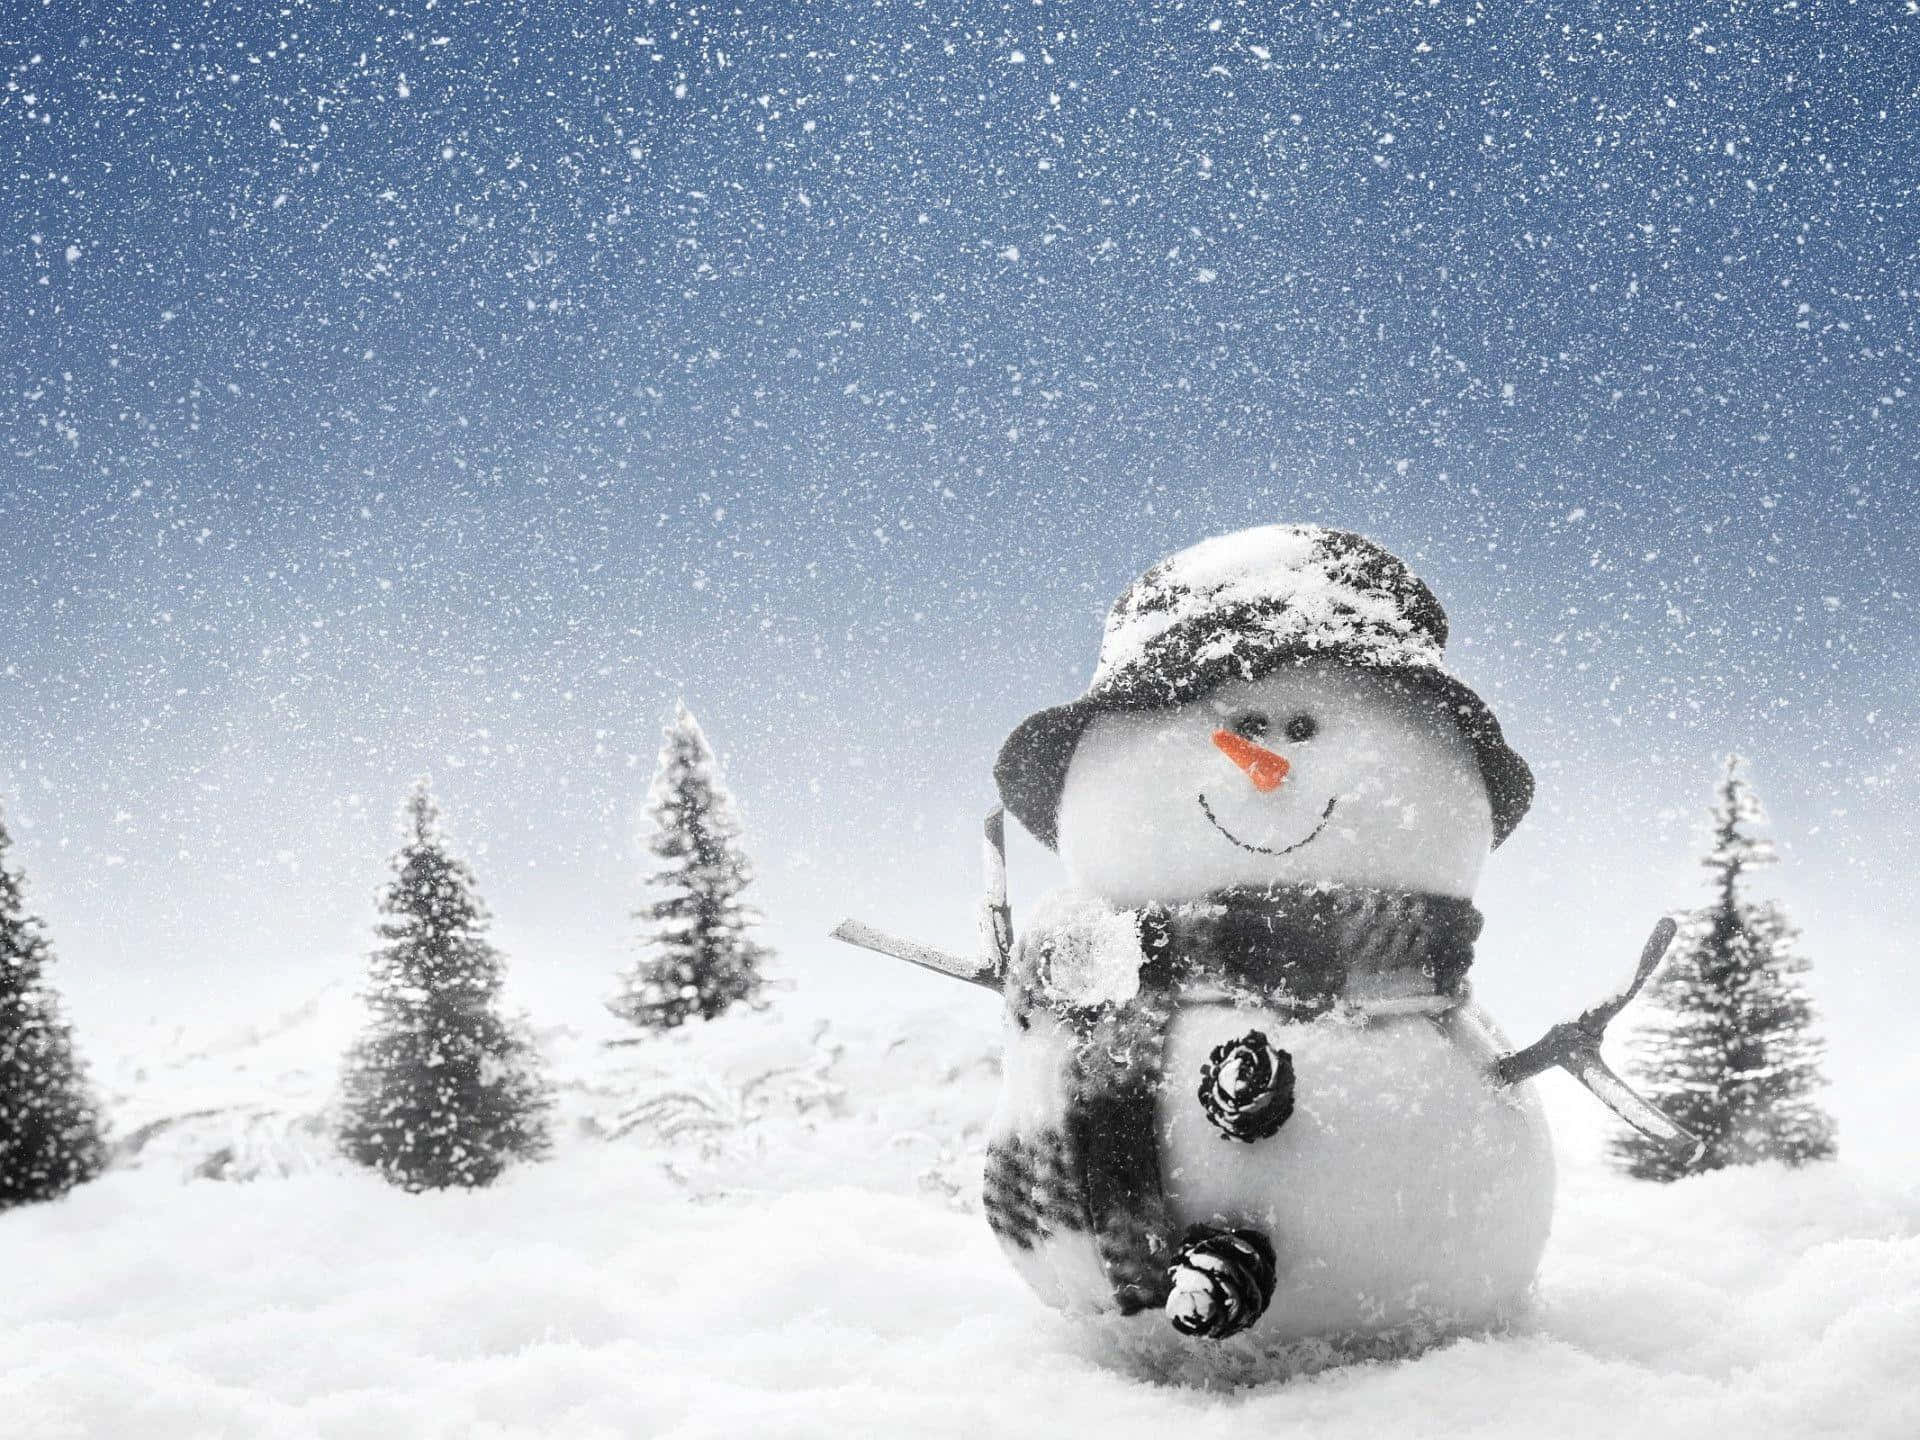 A Snowman Is Standing In The Snow With Trees In The Background Wallpaper